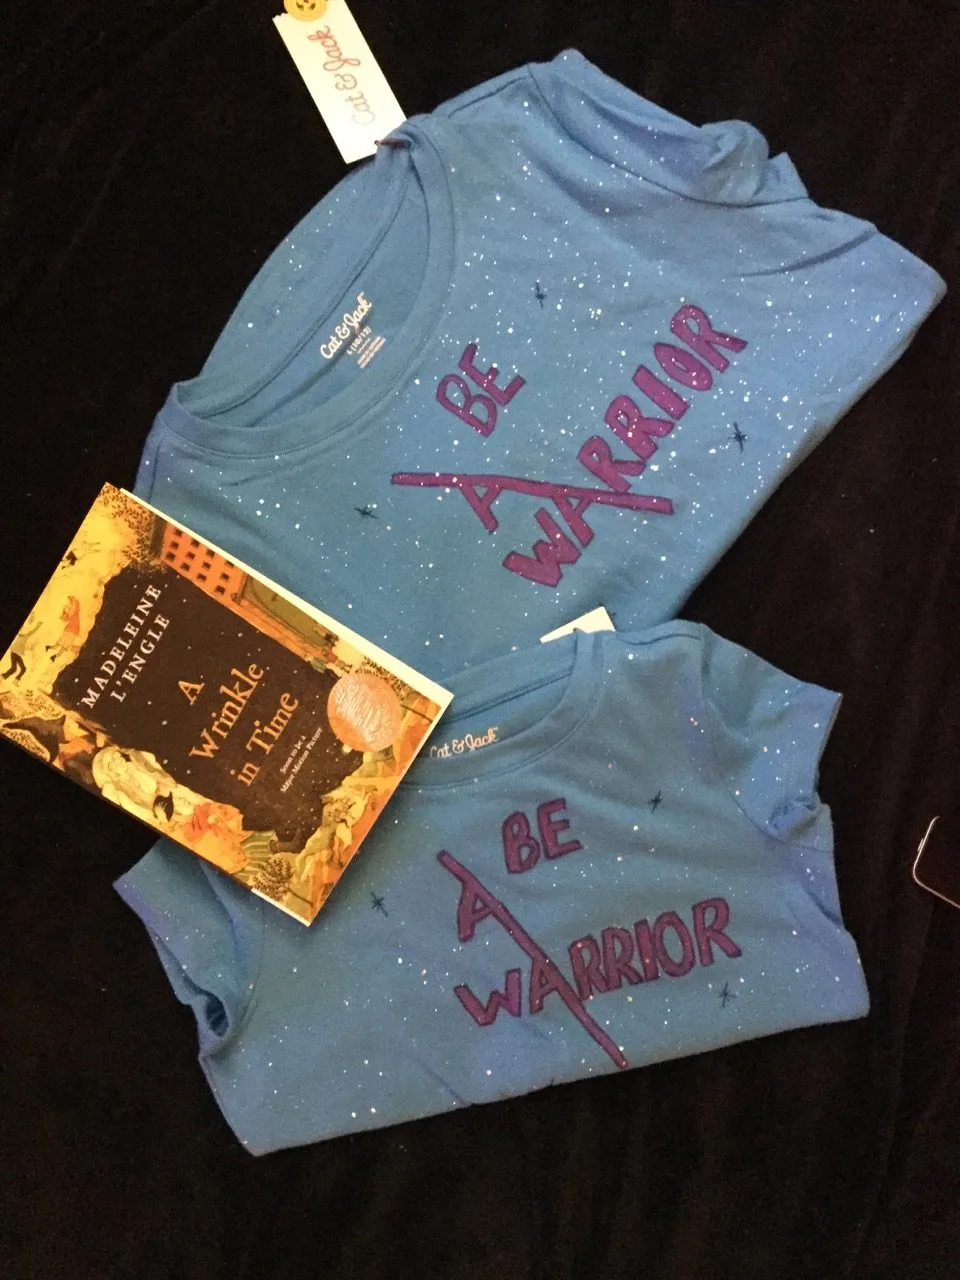 A Wrinkle in Time DIY Shirts | Be a Warrior #movies #awrinkleintime #familyactivities #strongwomen #empowergirls #hope